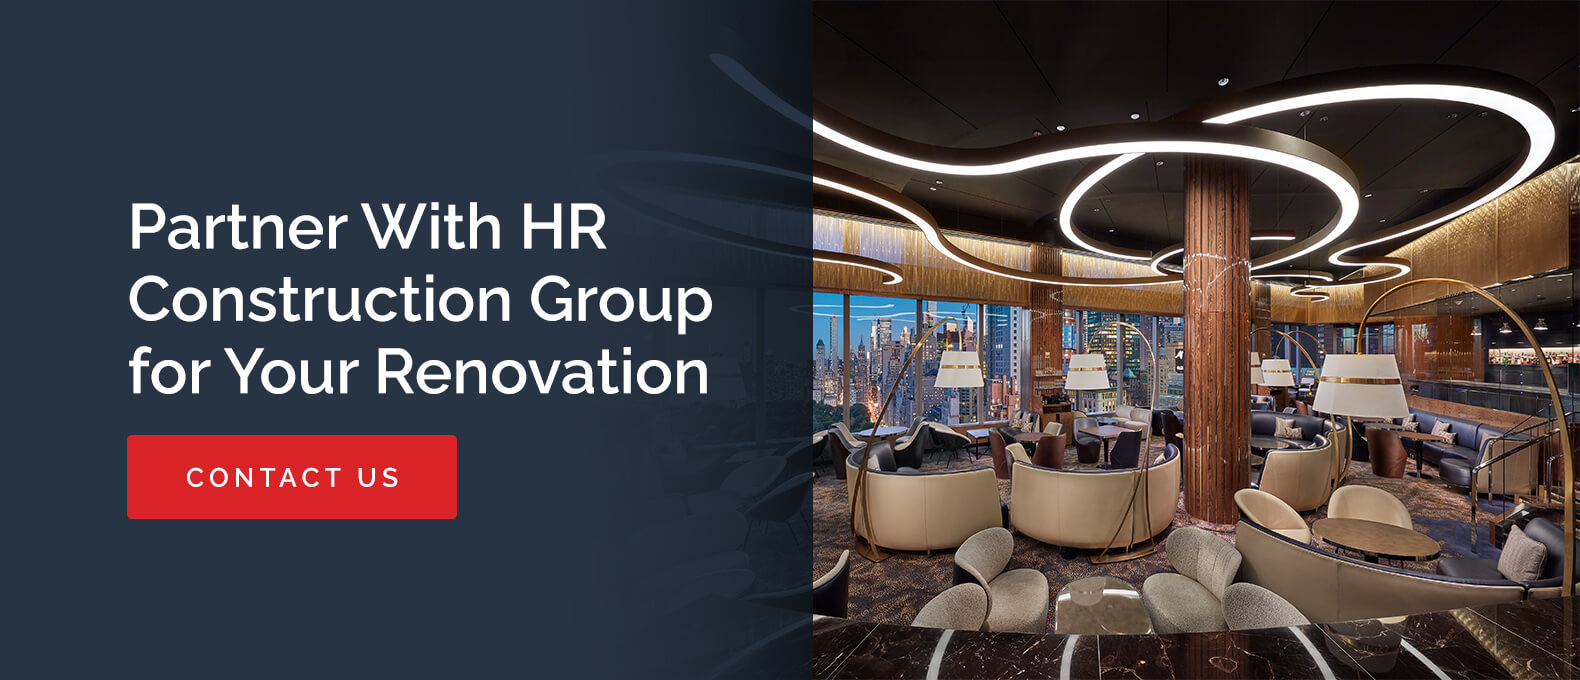 Partner with HR Construction Group for Your Renovation